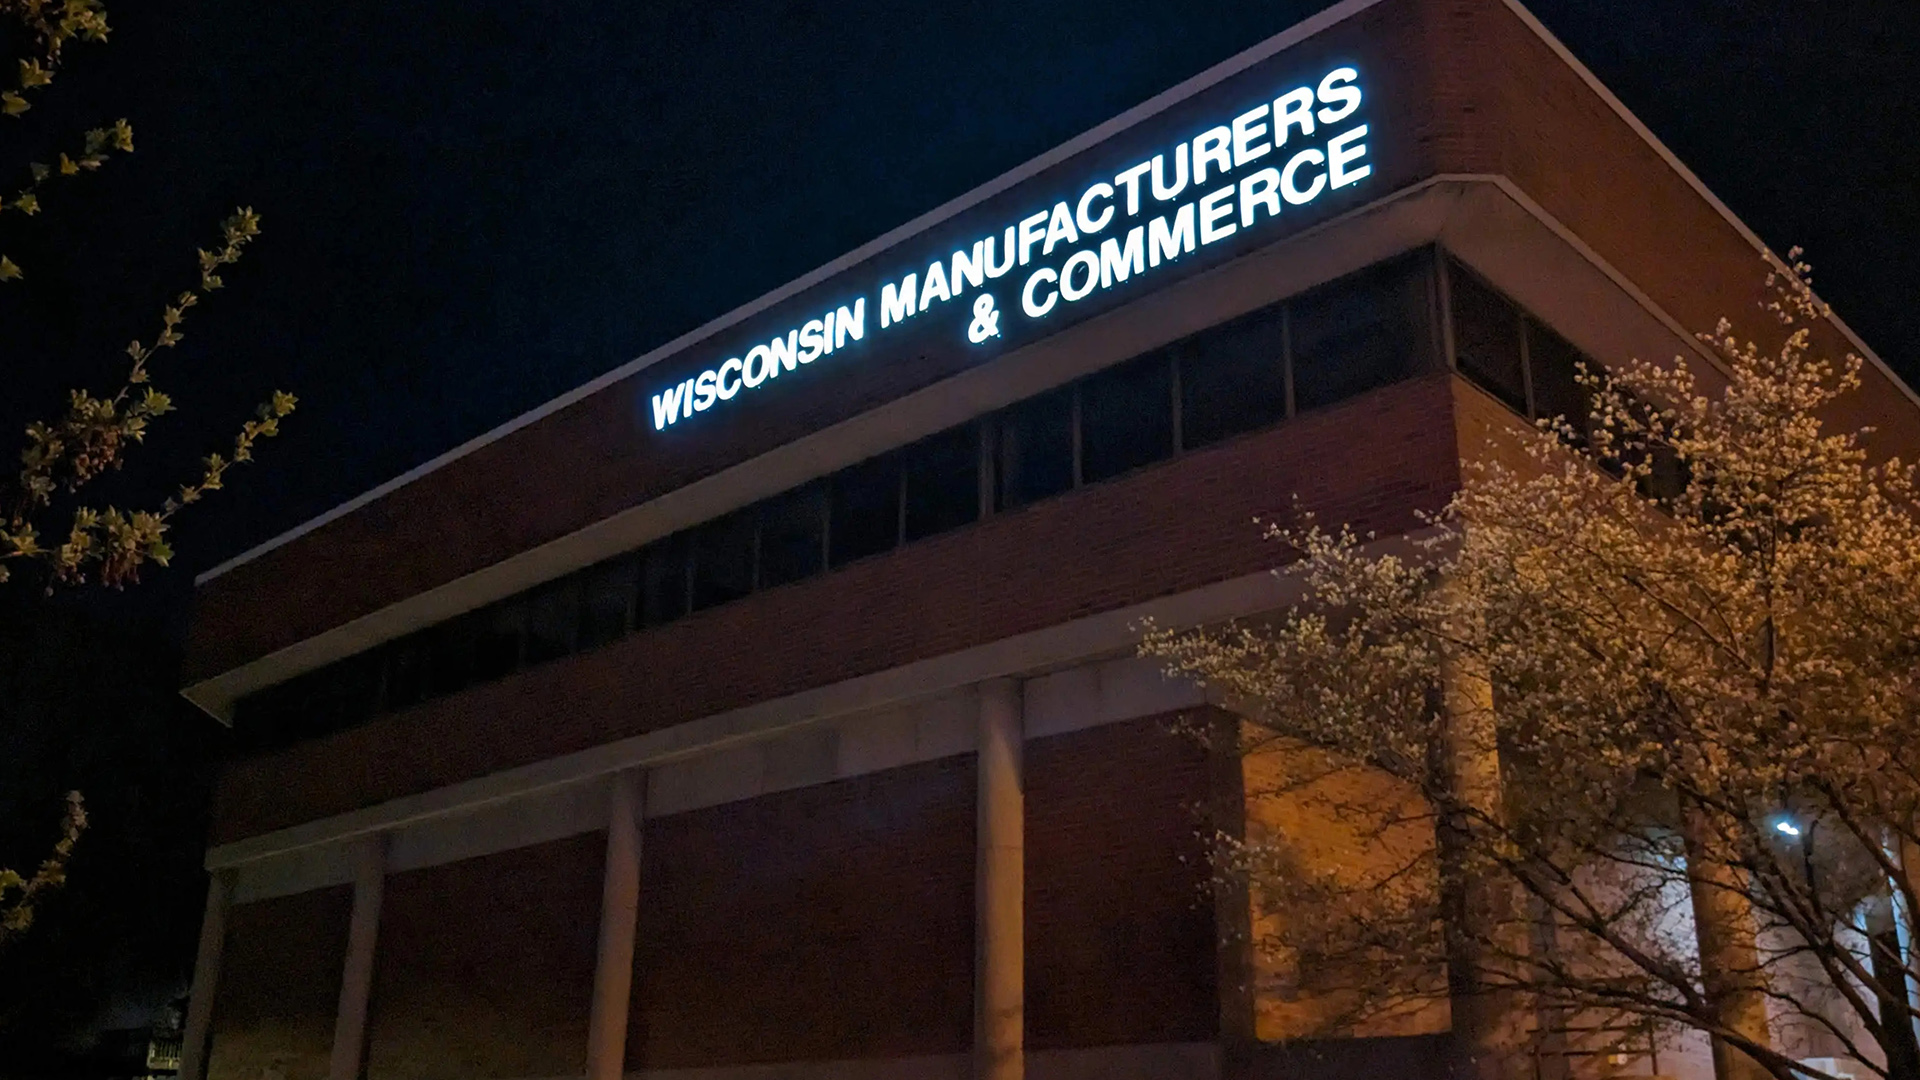 Lighted letters reading "Wisconsin Manufacturers & Commerce" are placed at the top of a building with concrete pillars, brick walls and one row of windows, with trees in the foreground.